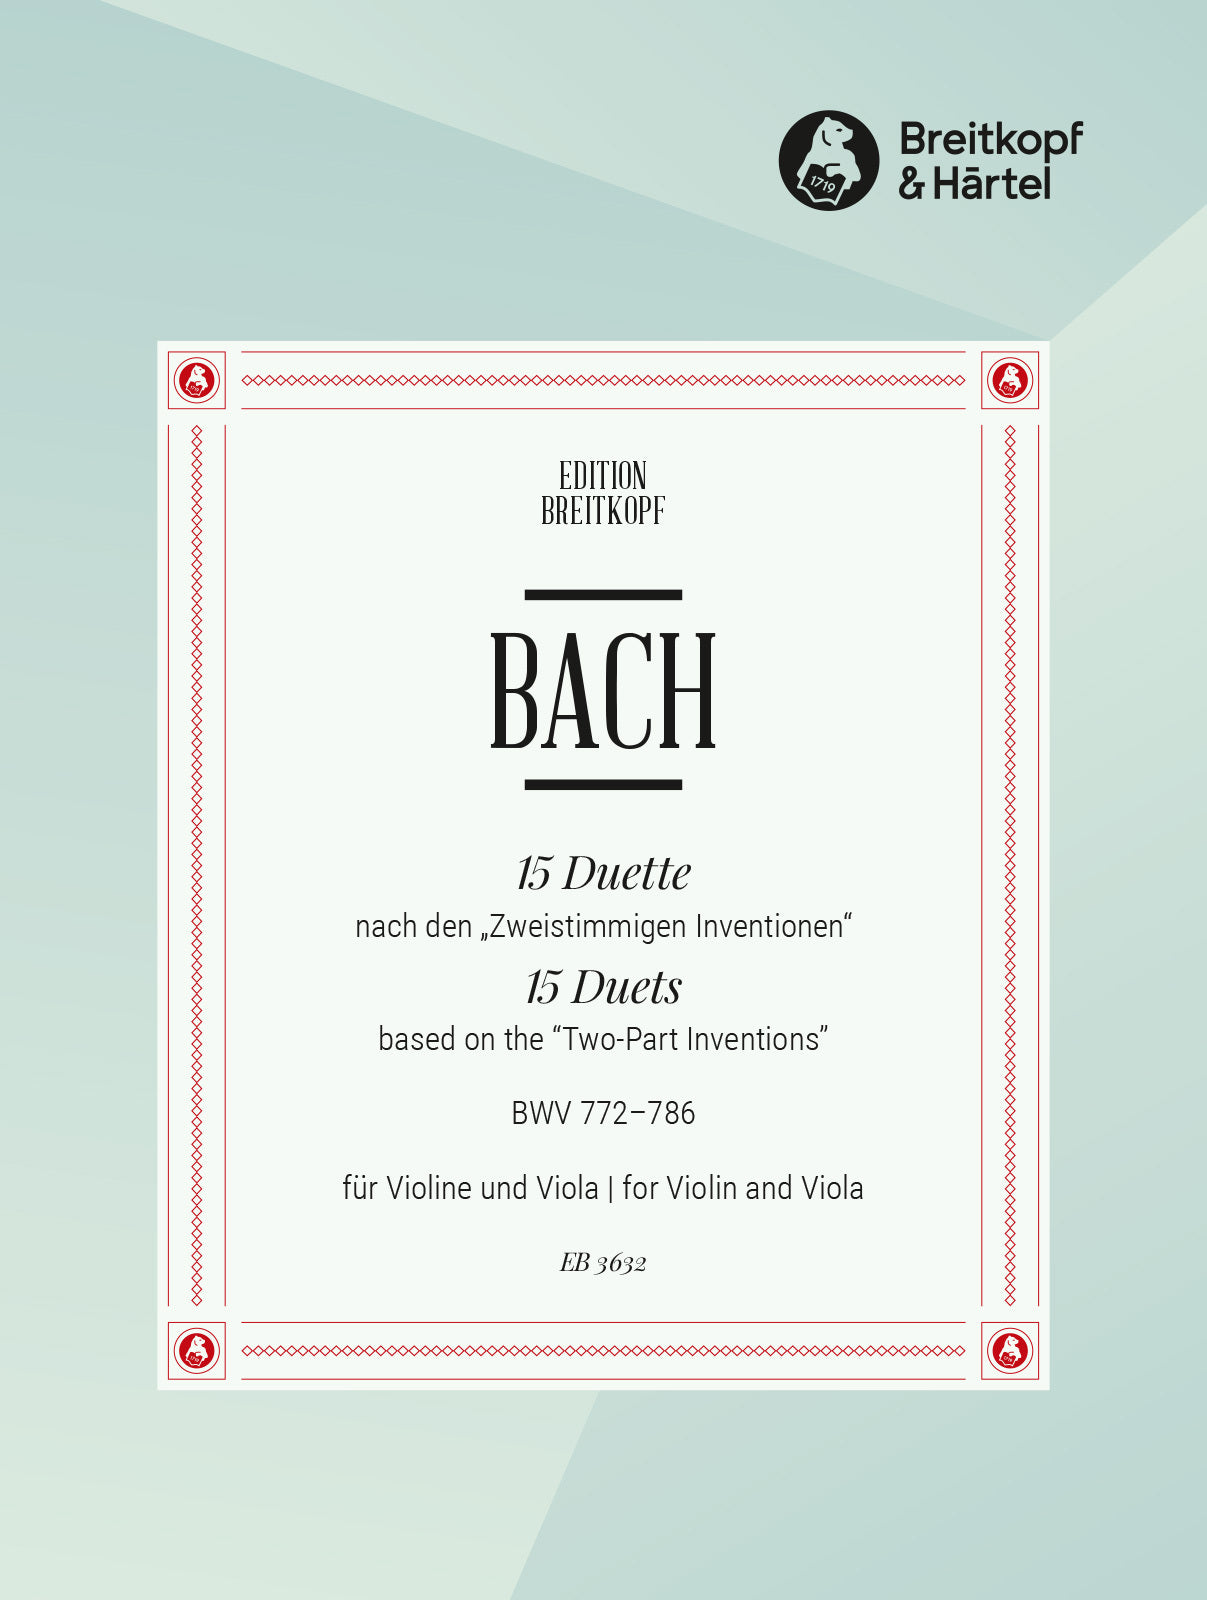 Bach: 15 Duets based on the "Two-Part Inventions" for violin & viola